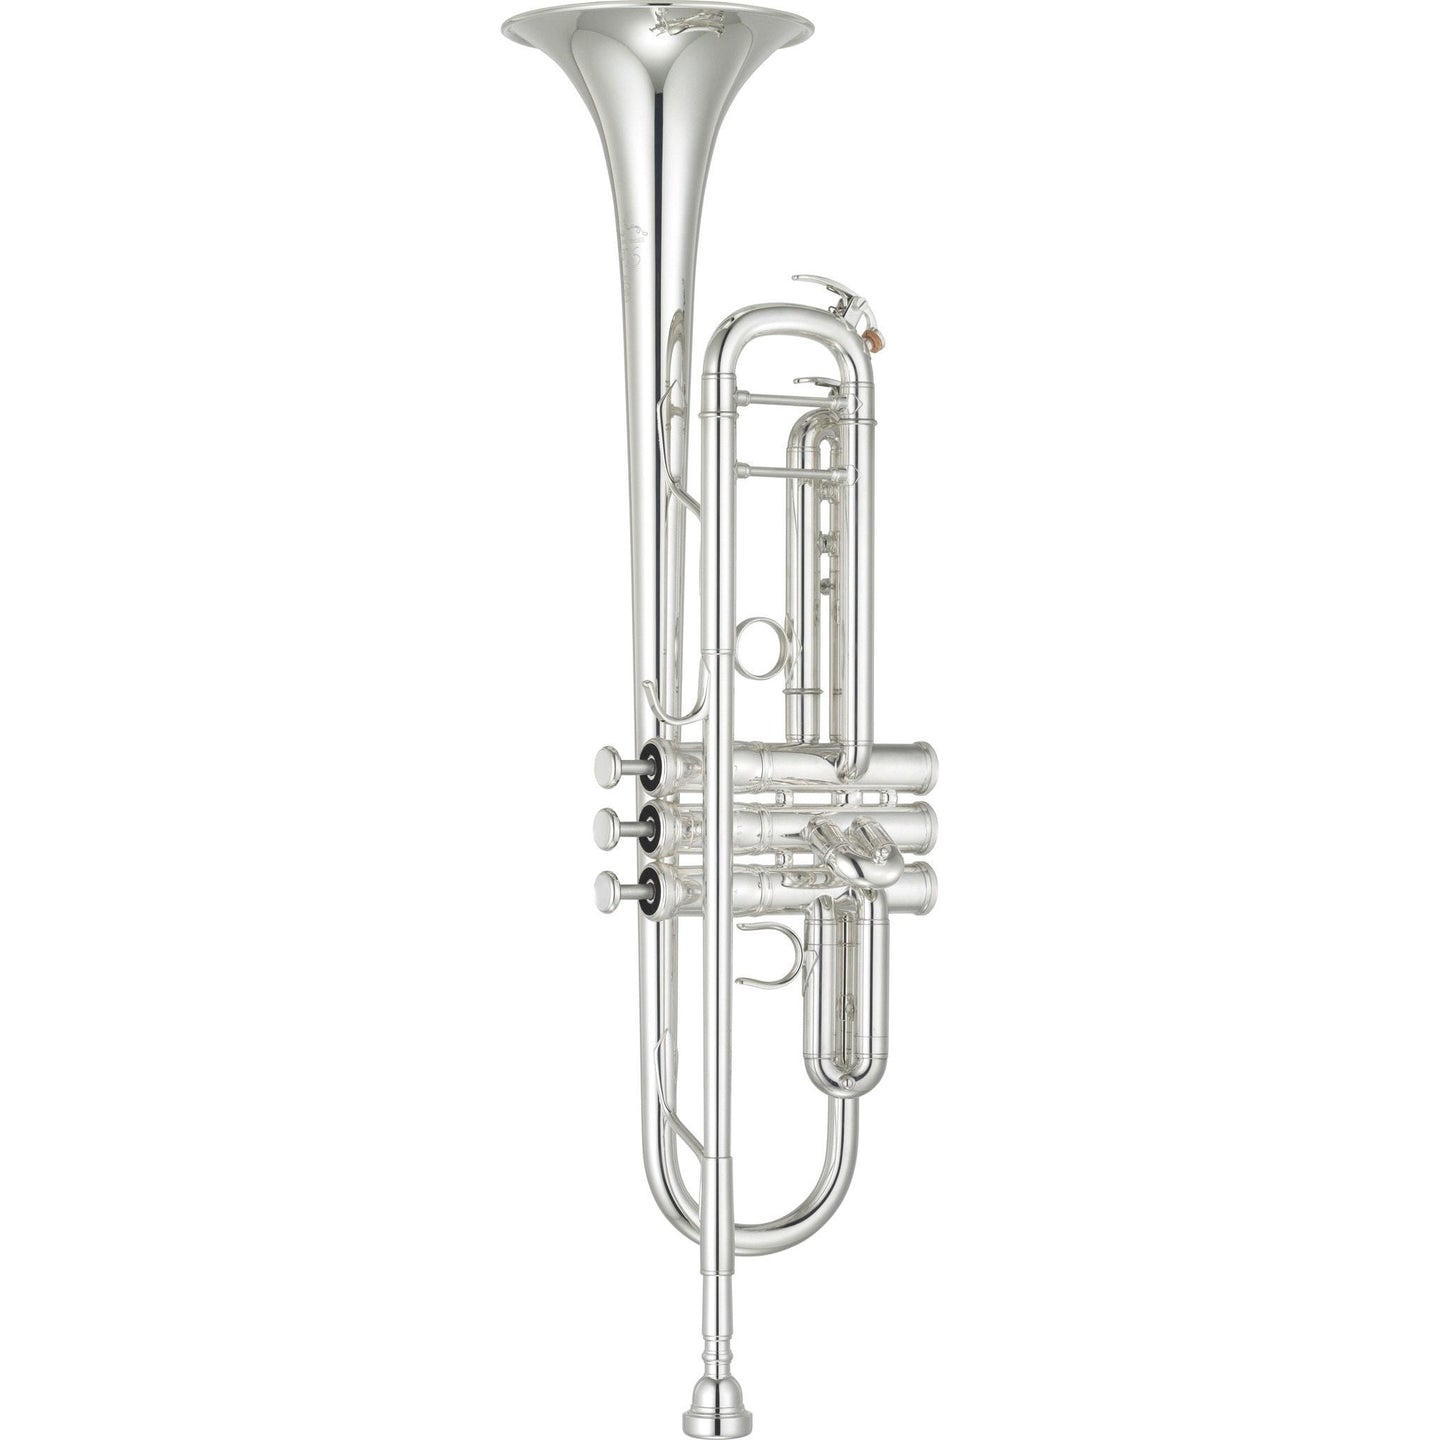 Yamaha YTR-8345II Professional Xeno Series Trumpet YTR-8345IIGS - Gold Brass Bell and Silver Plated